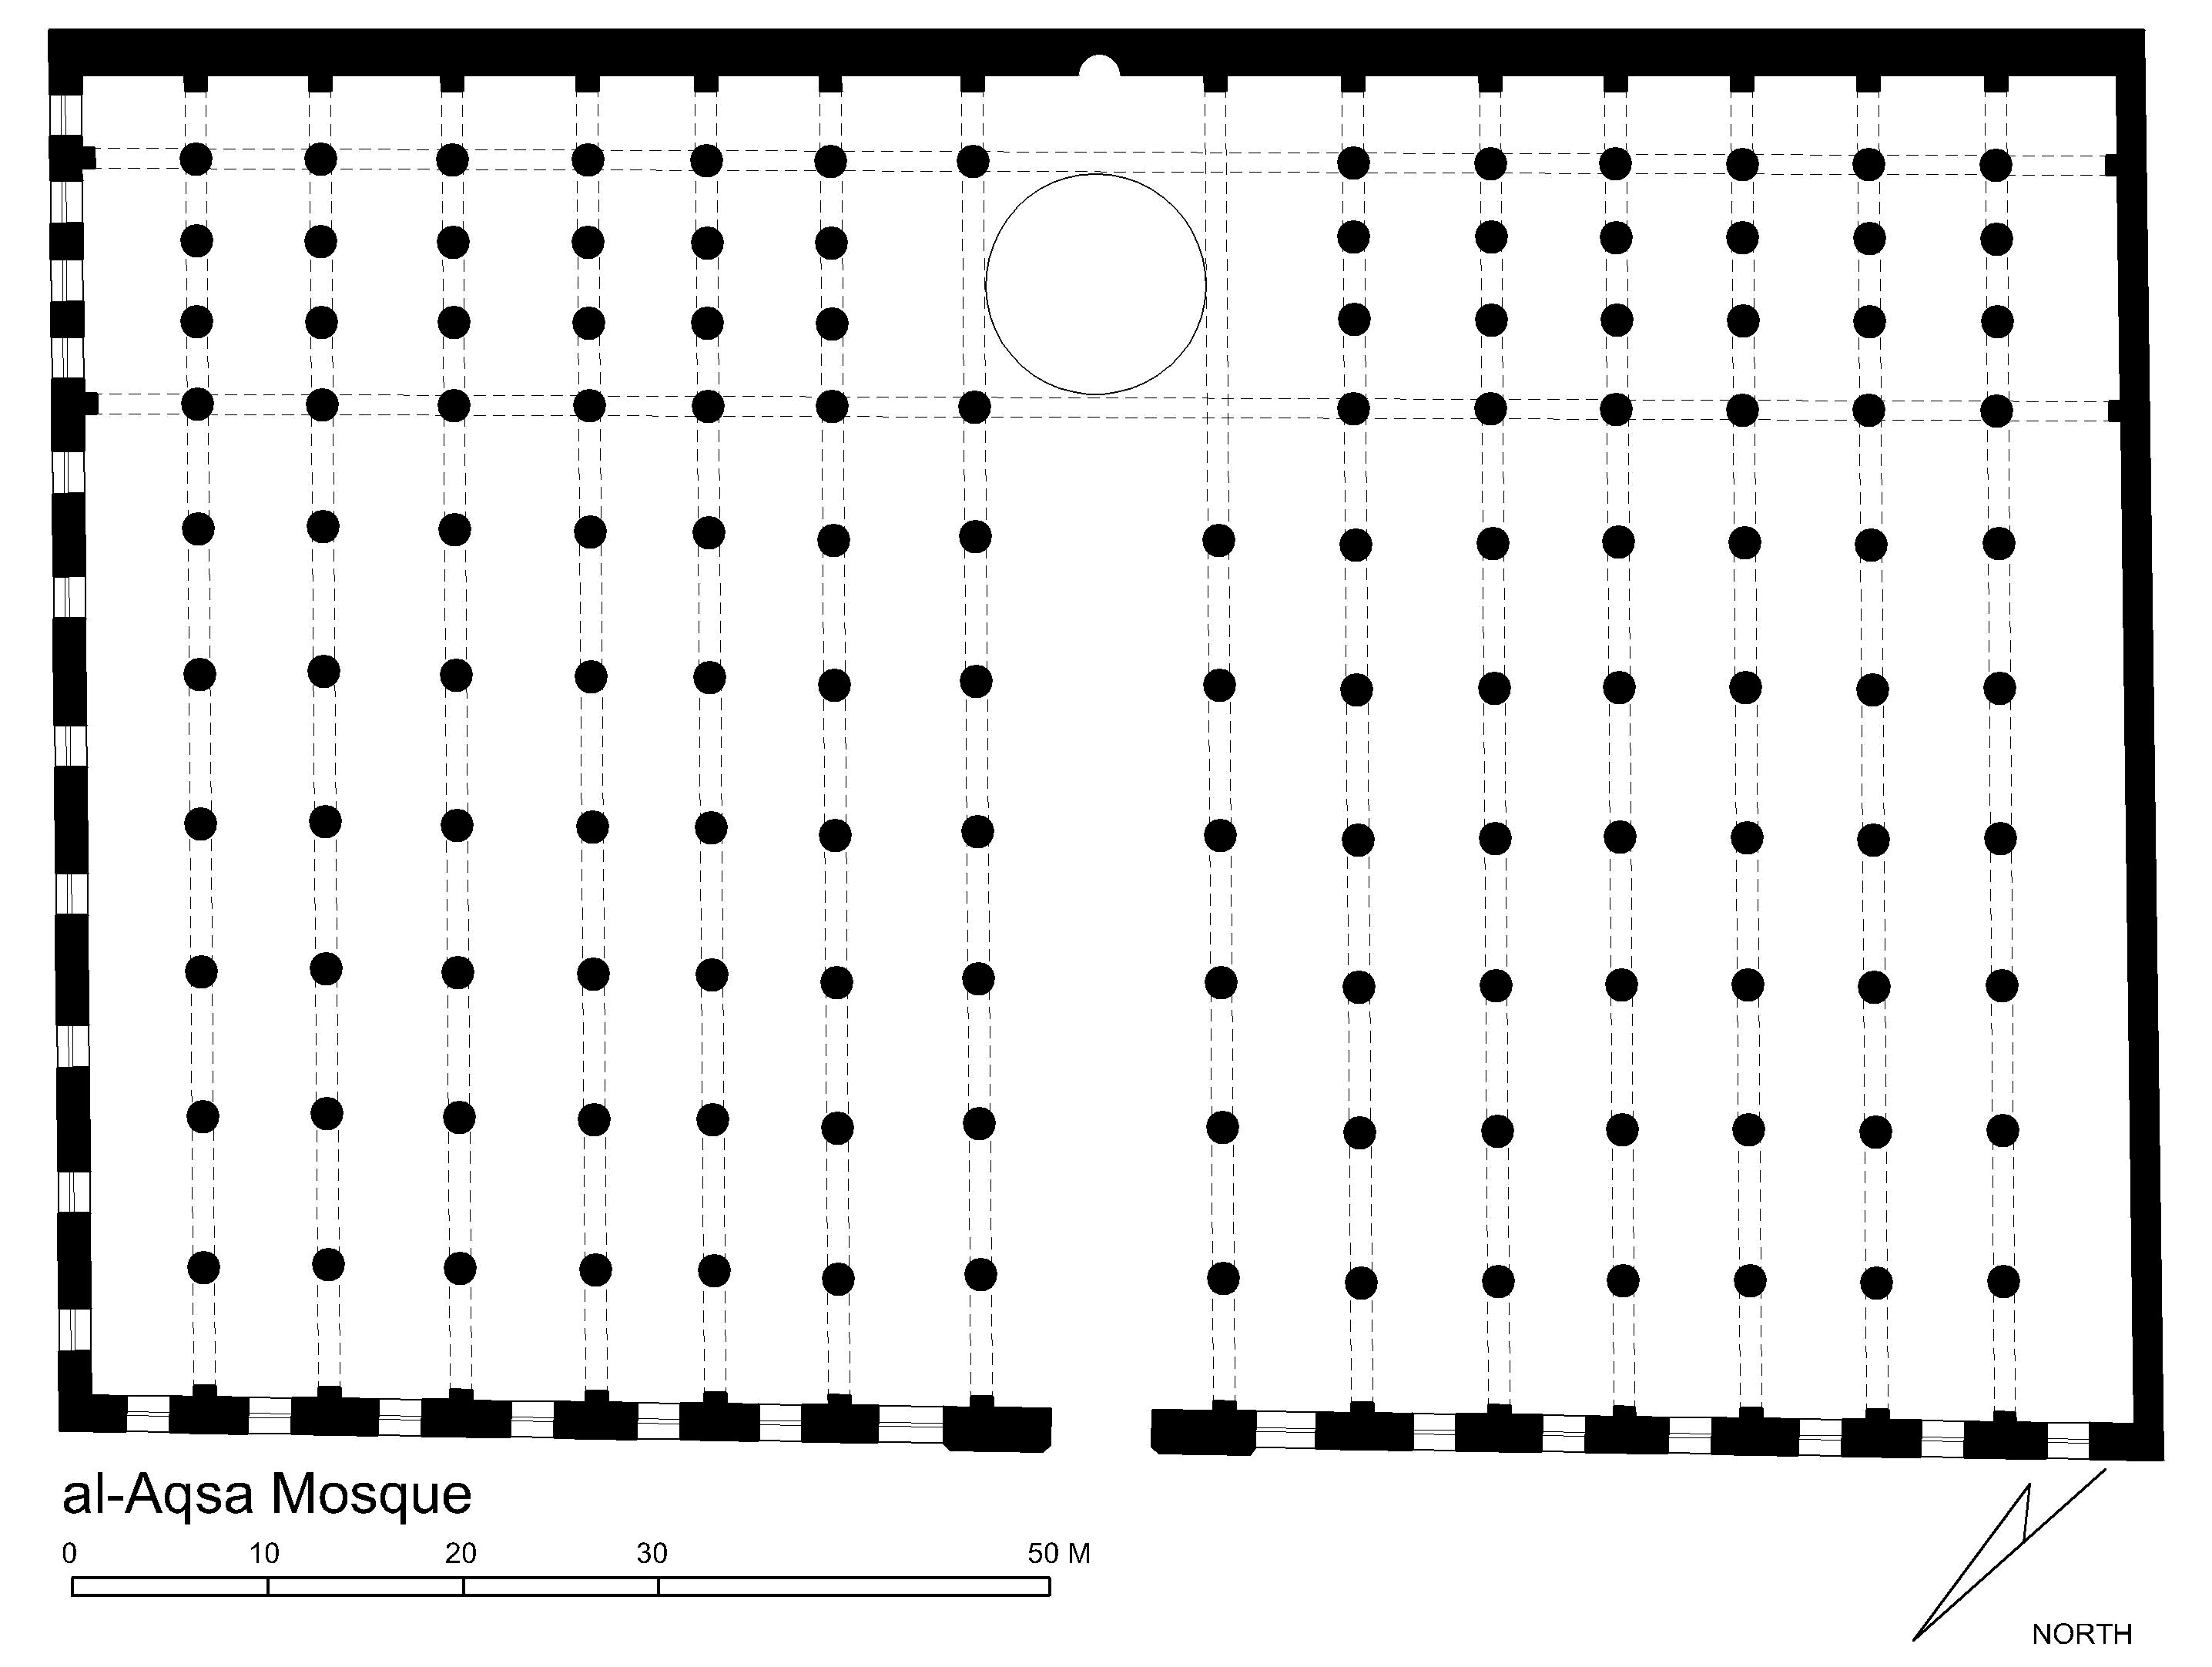 Jami' al-Aqsa - Floor plan of mosque in AutoCAD 2000 format. Click the download button to download a zipped file containing the .dwg file. 